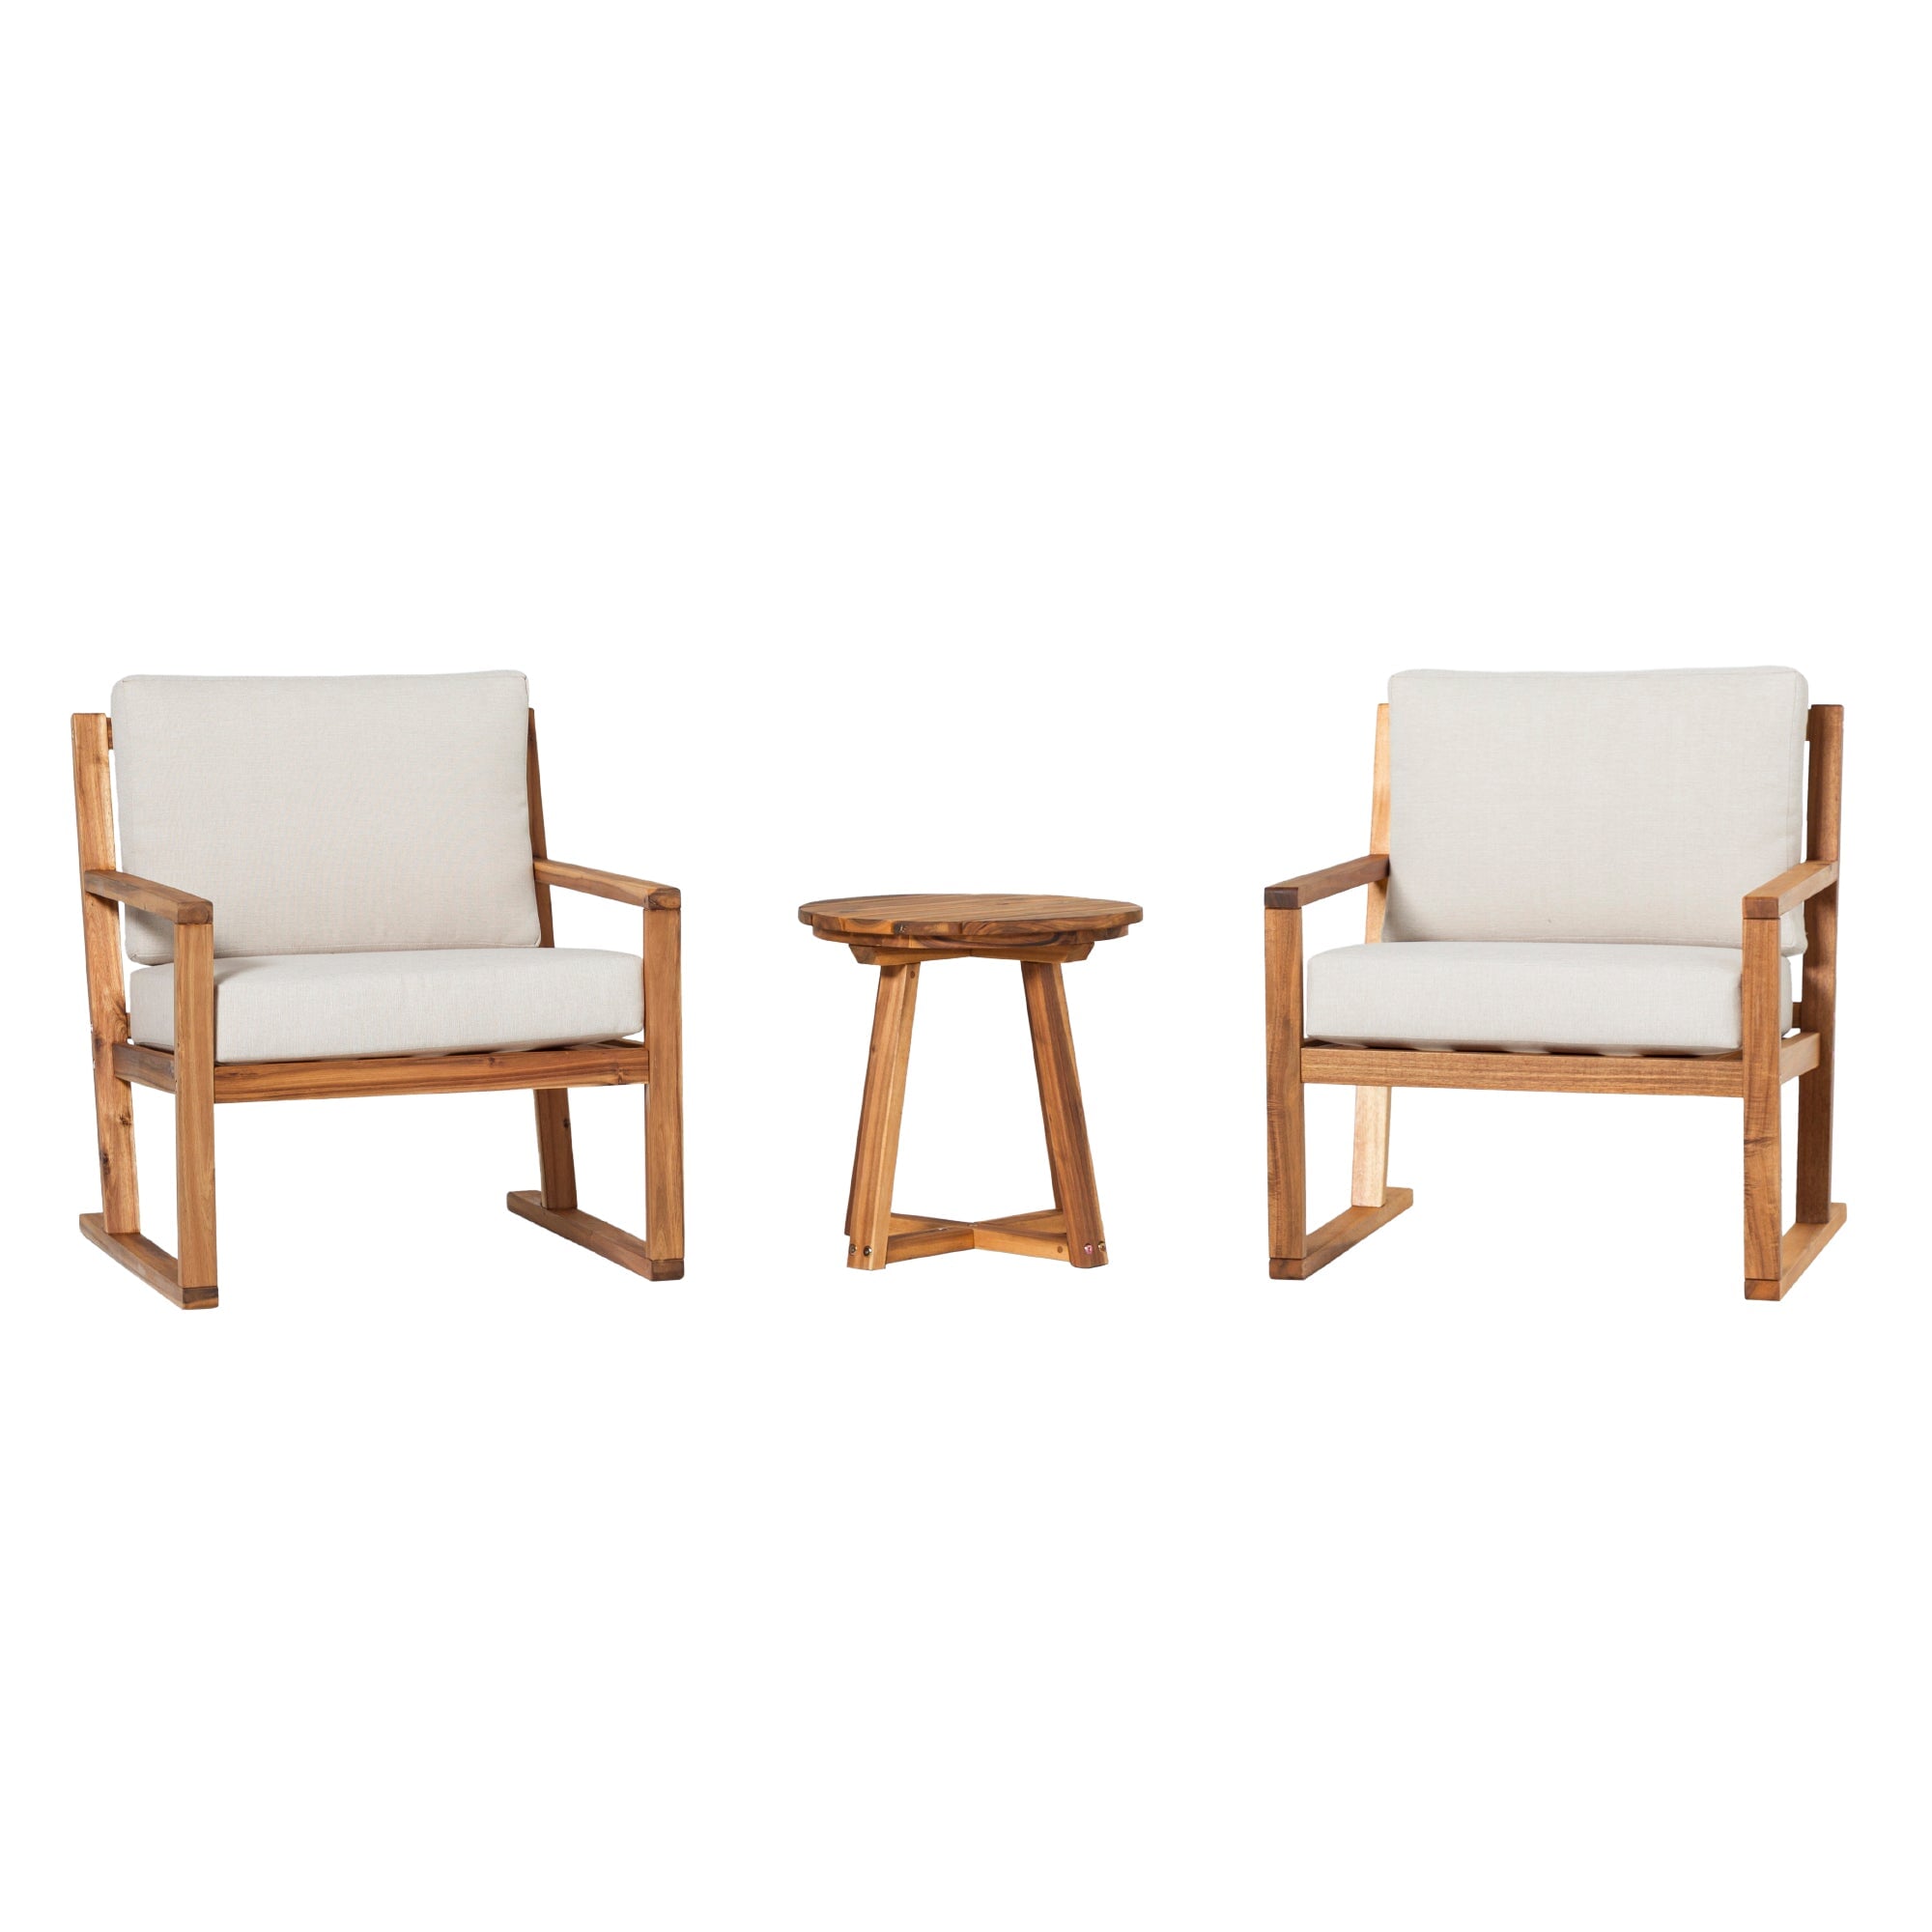 Walker Edison Prenton 3-Piece Modern Acacia Outdoor Slatted Chat Set with Side Table